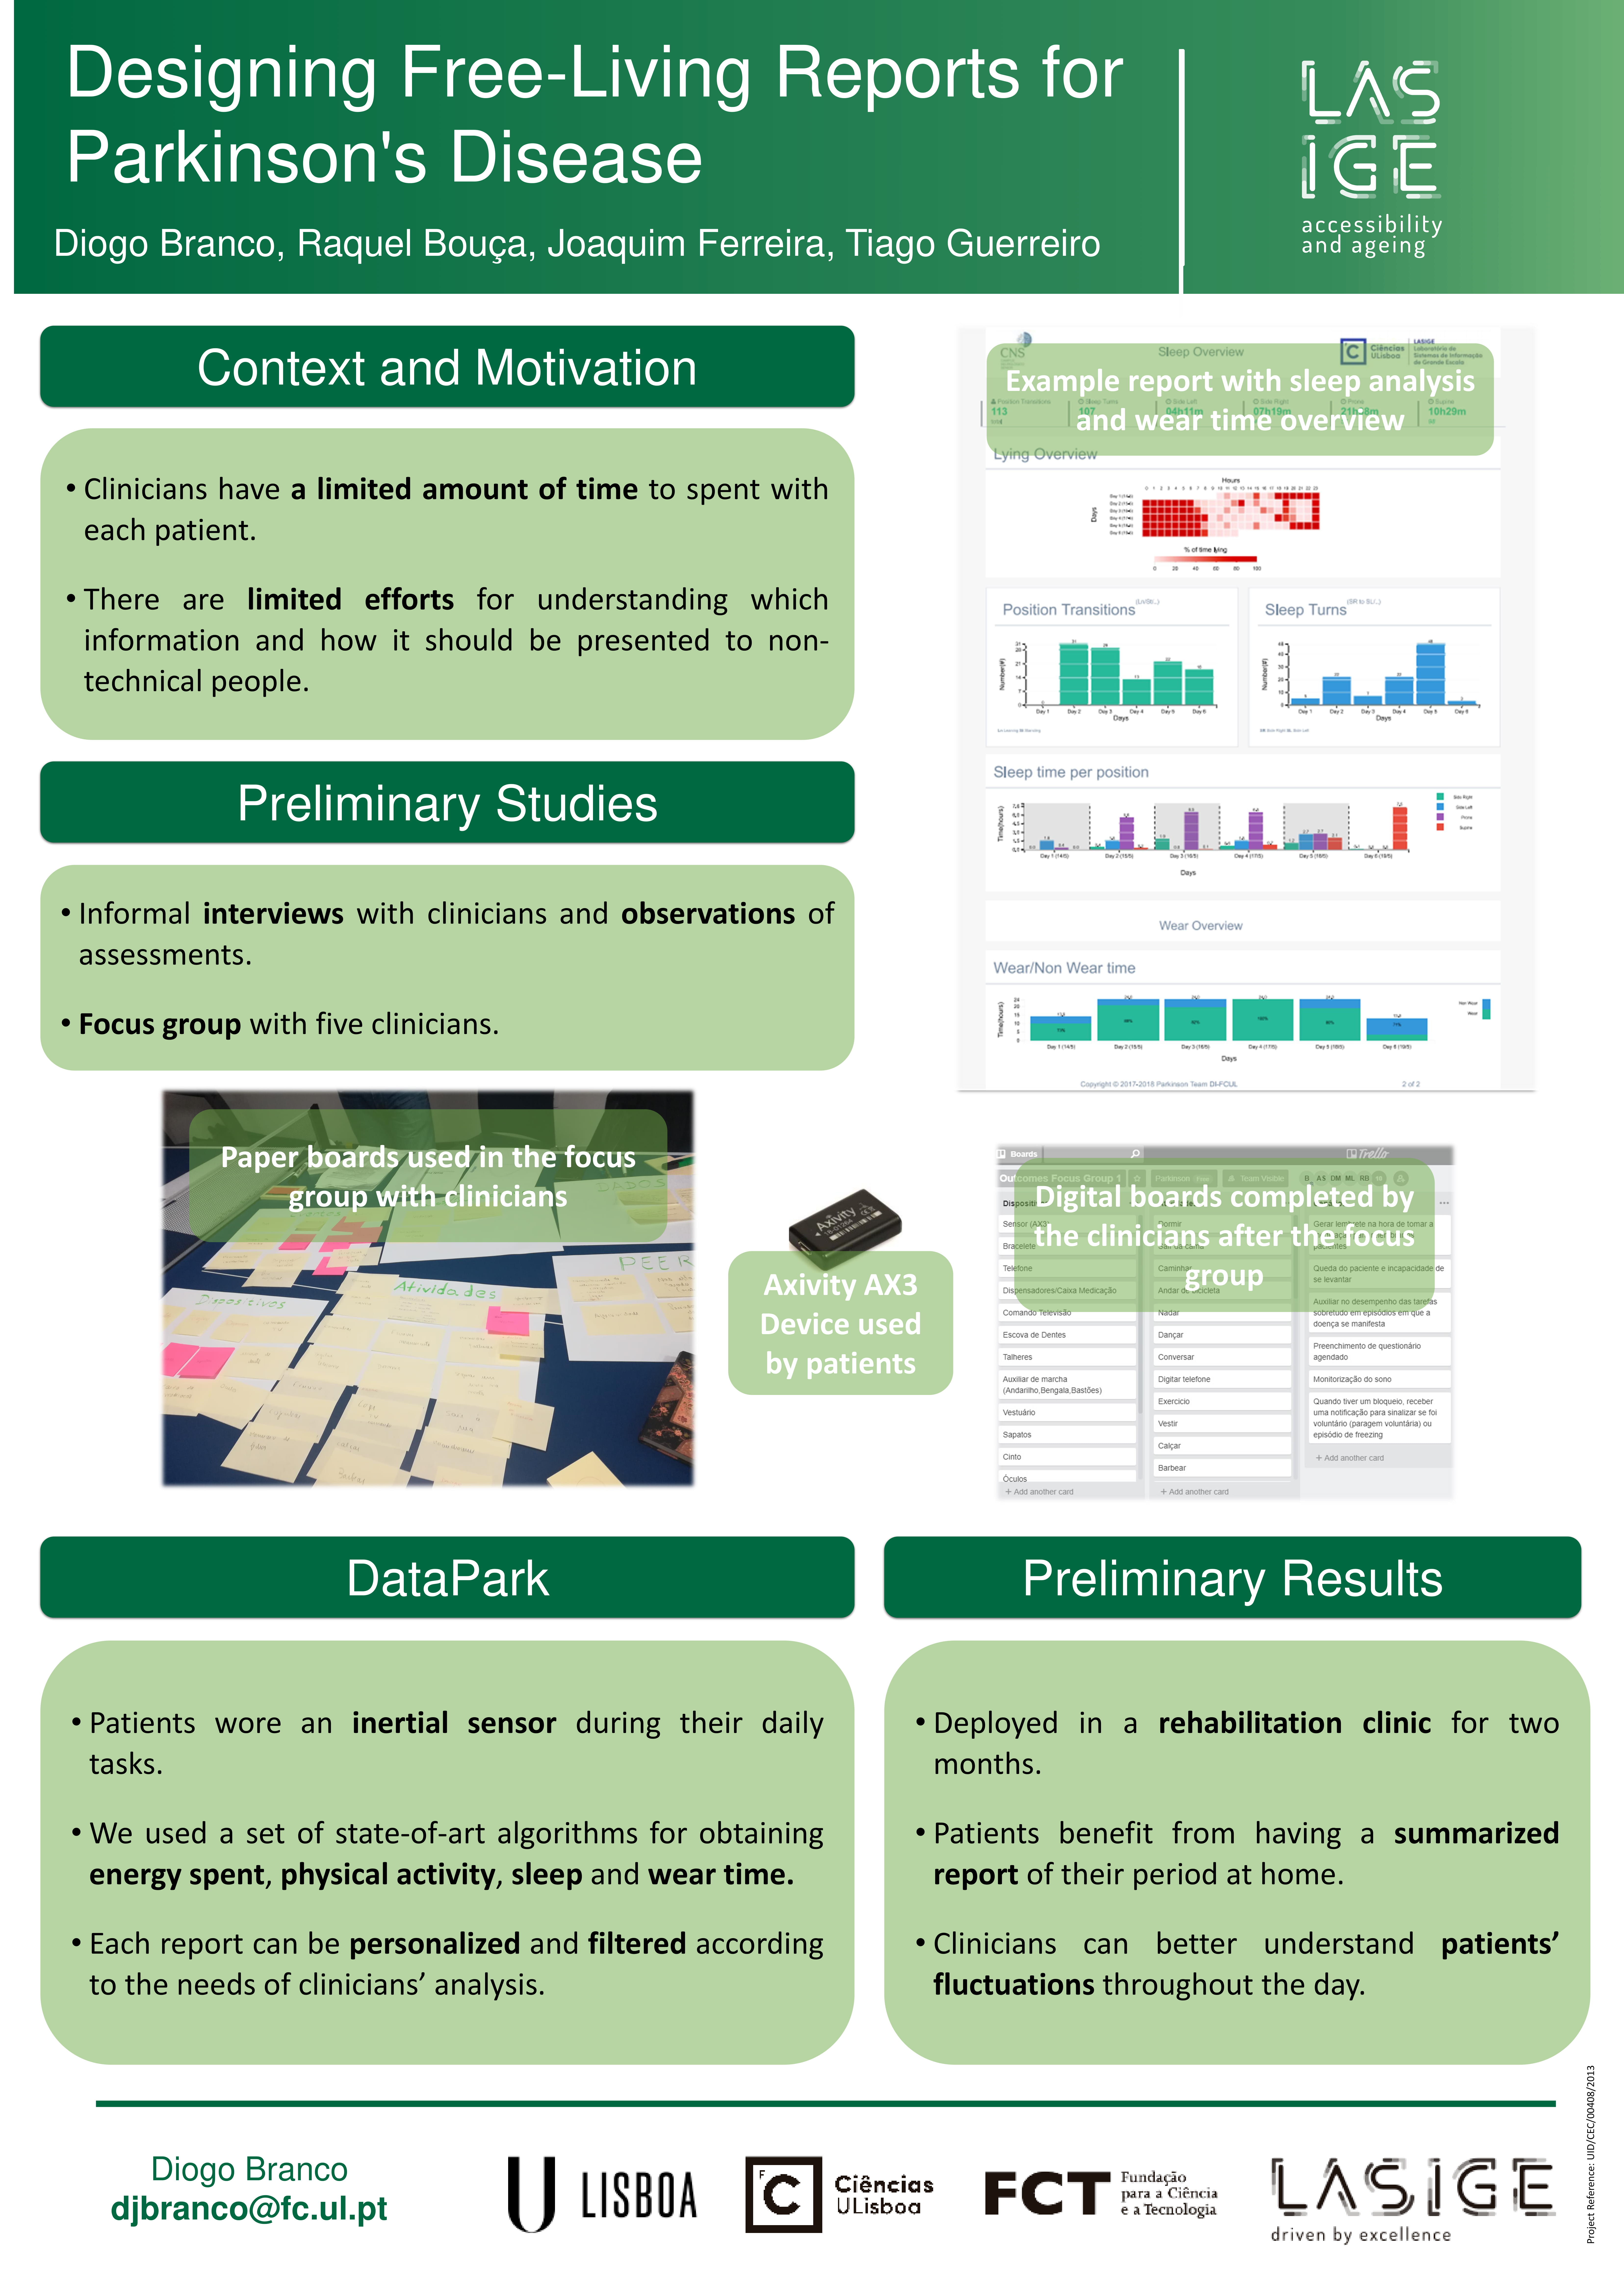 Designing Free-Living Reports for Parkinson's Disease poster